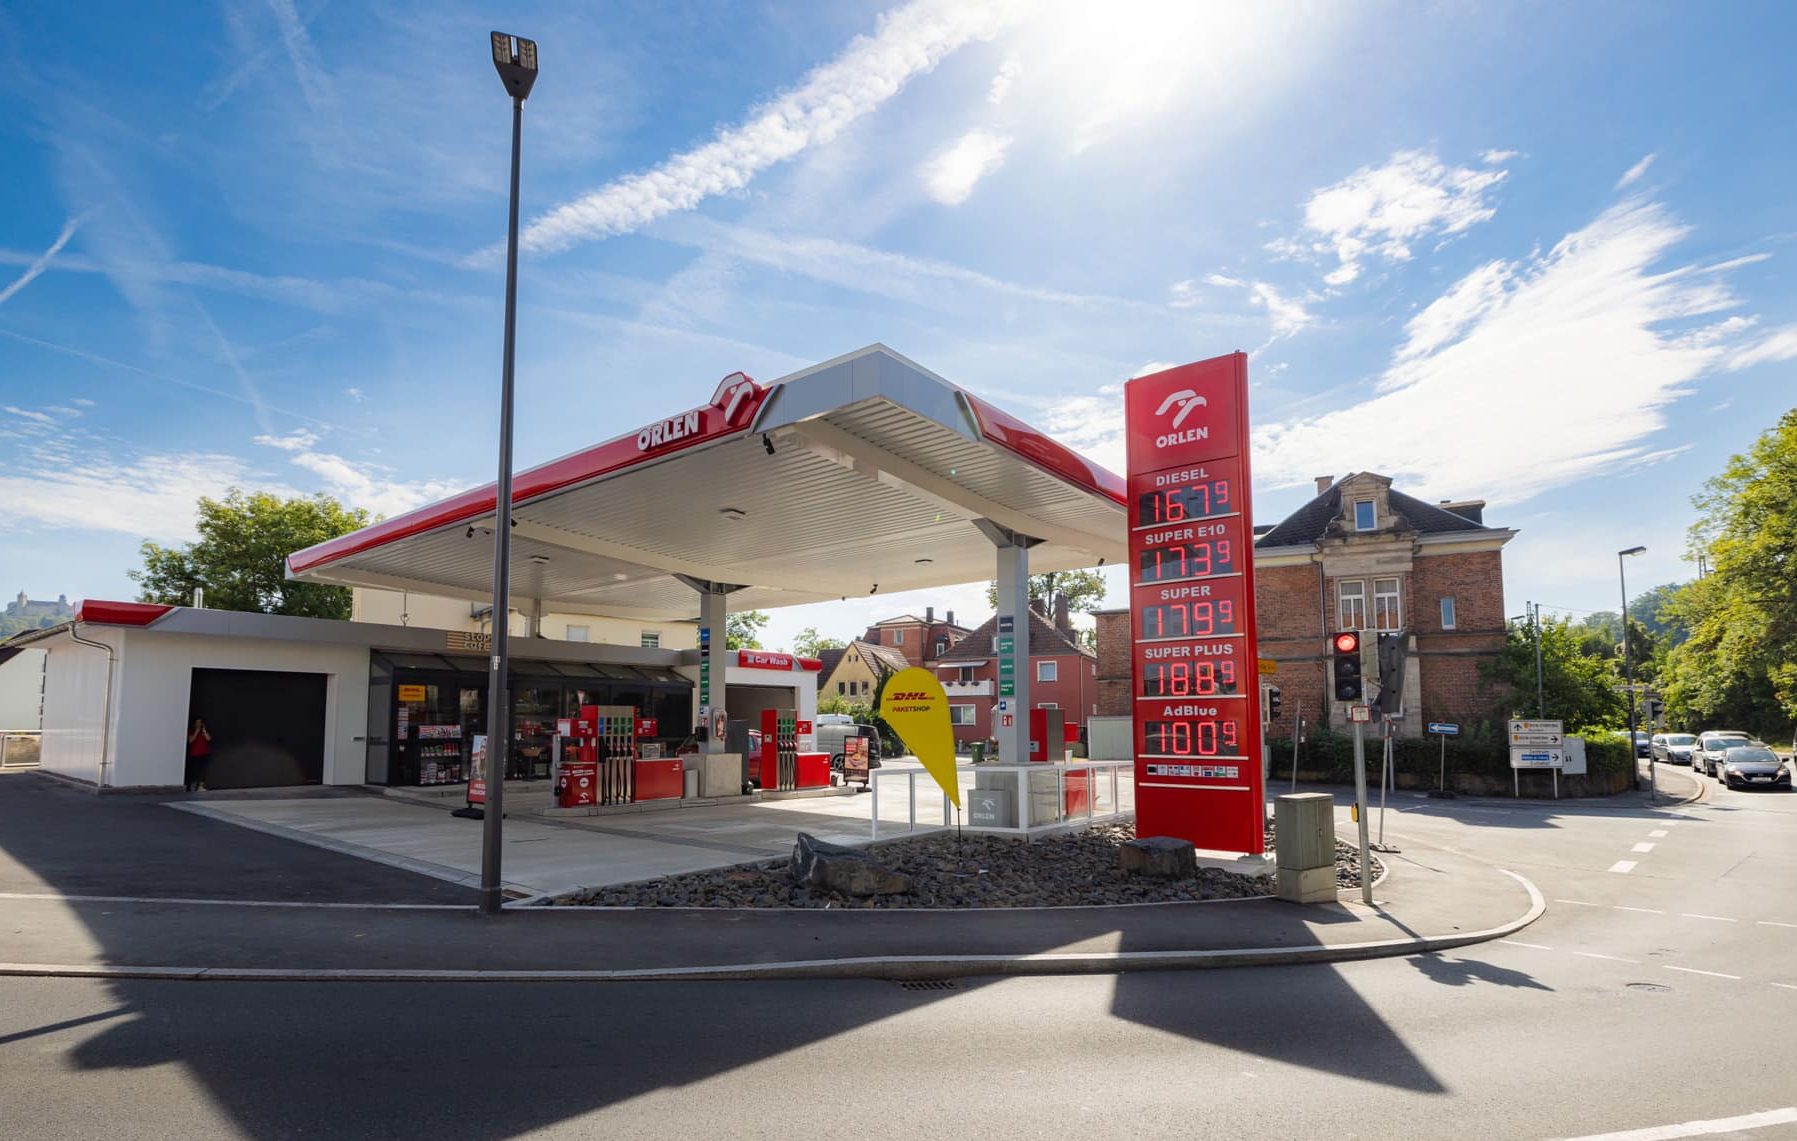 Polish Oil Giant Expands with 141 Petrol Stations in the Country by Spring